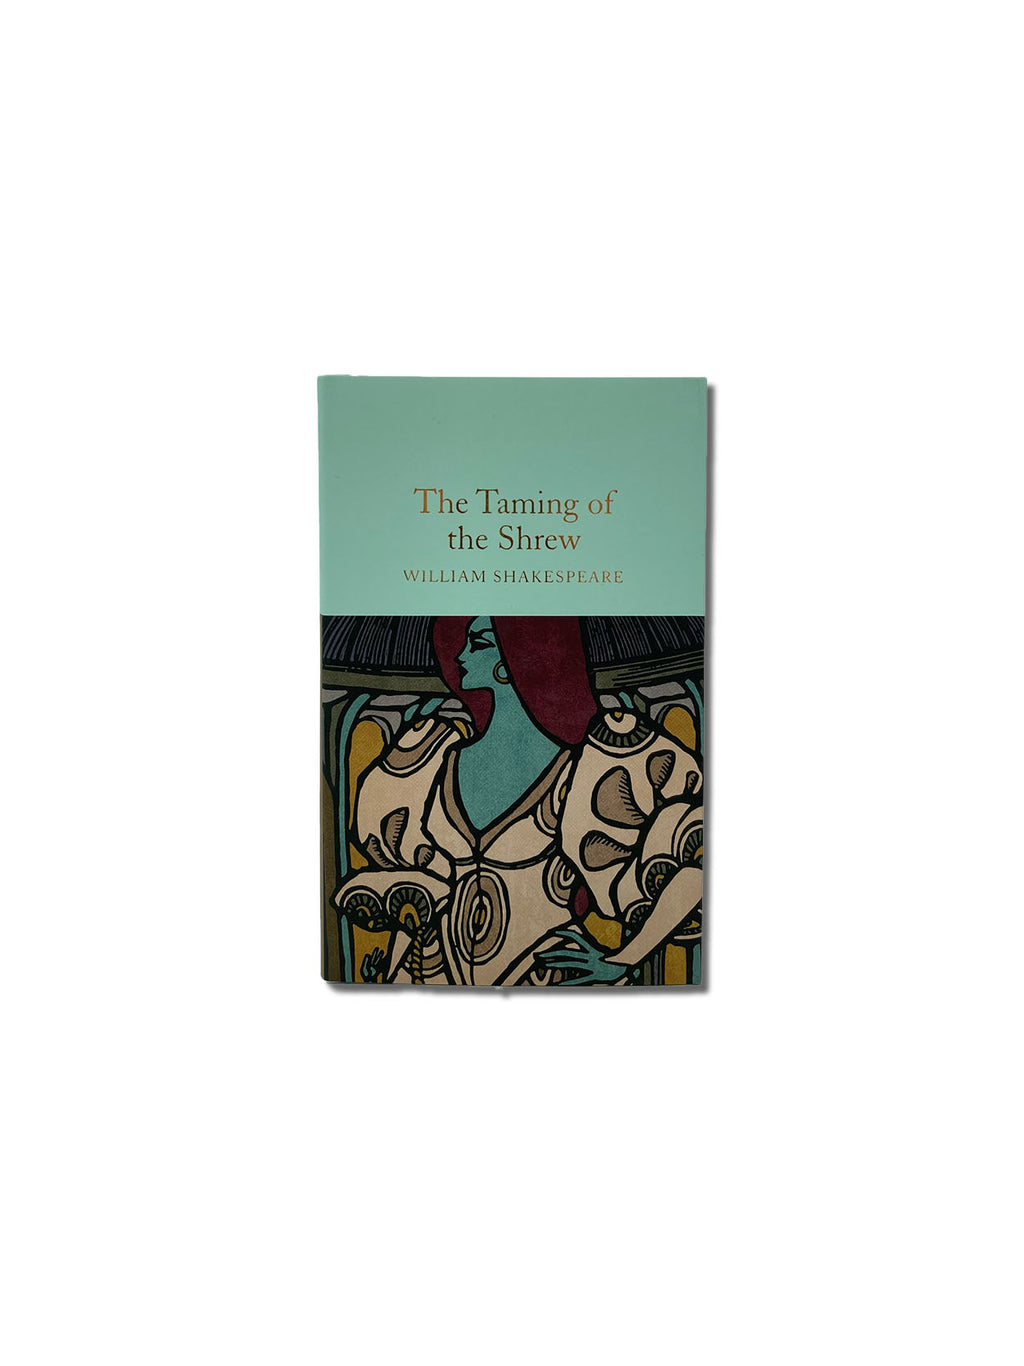 The Taming of the Shrew - Macmillan Collector's Library